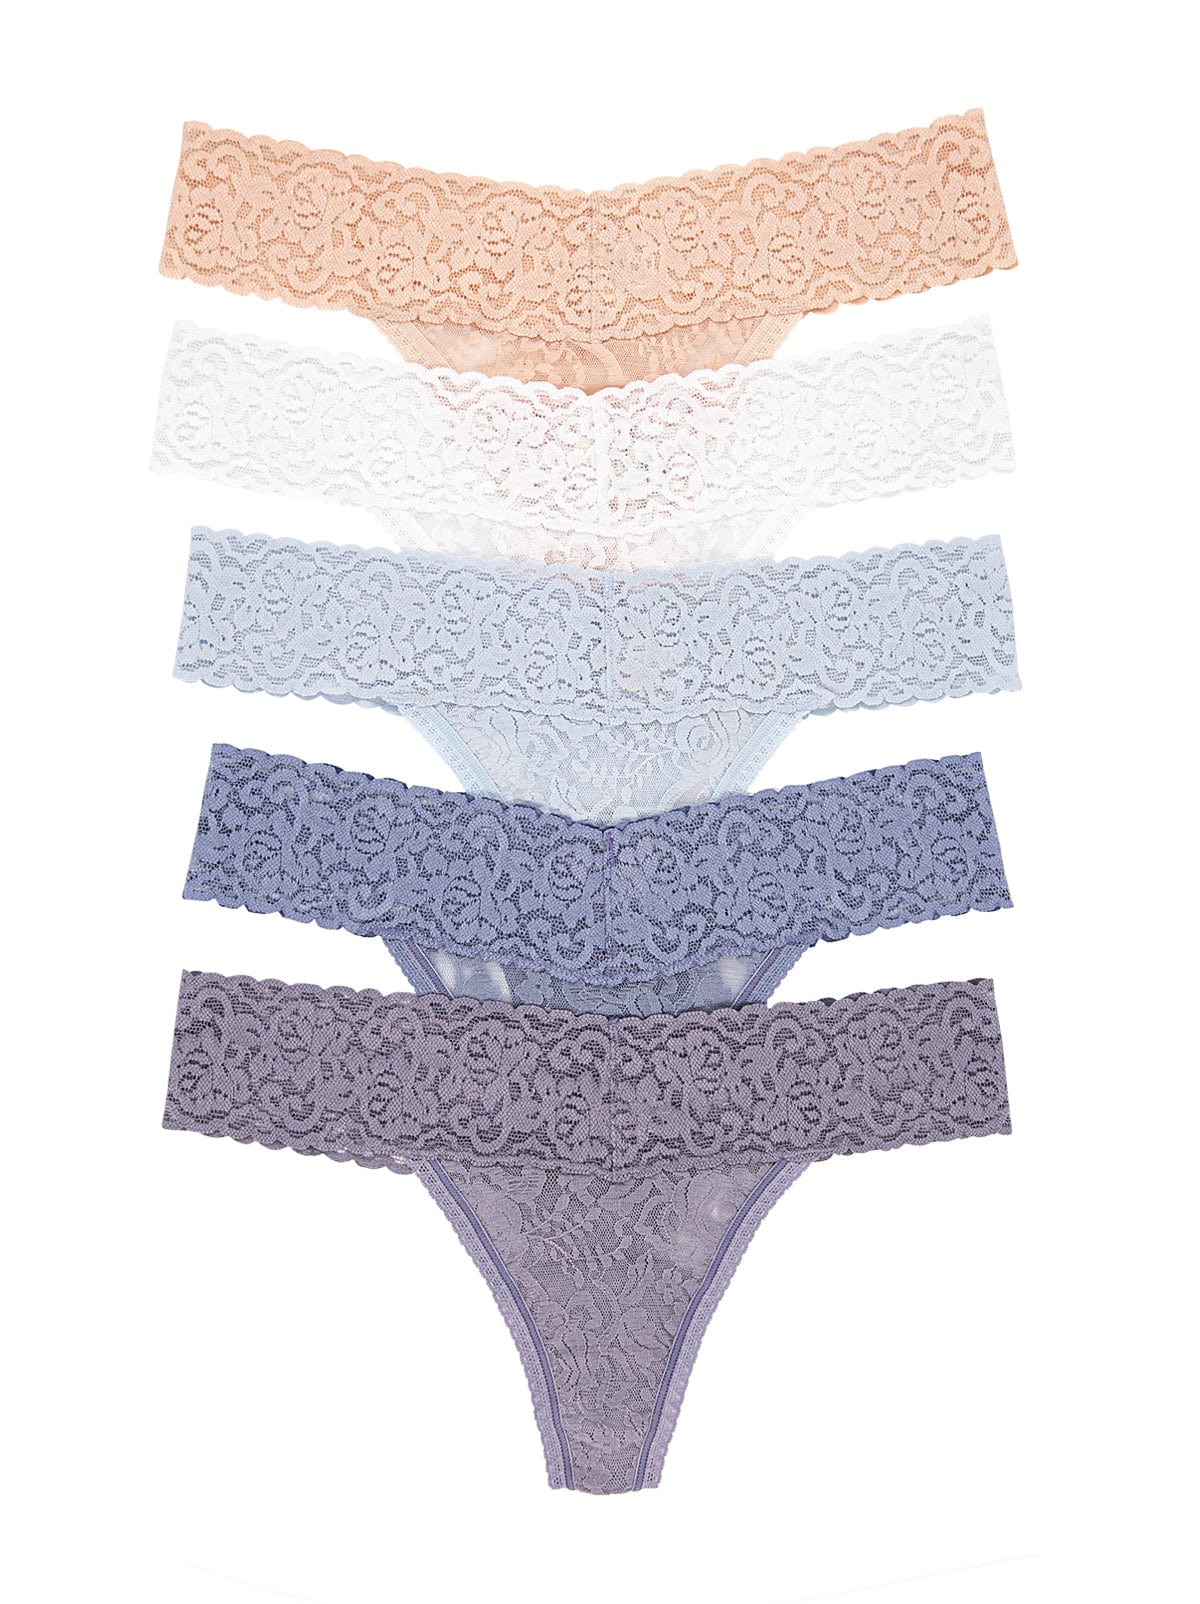 Image of Signature Stretchy Lace Low Rise Thong 5-Pack